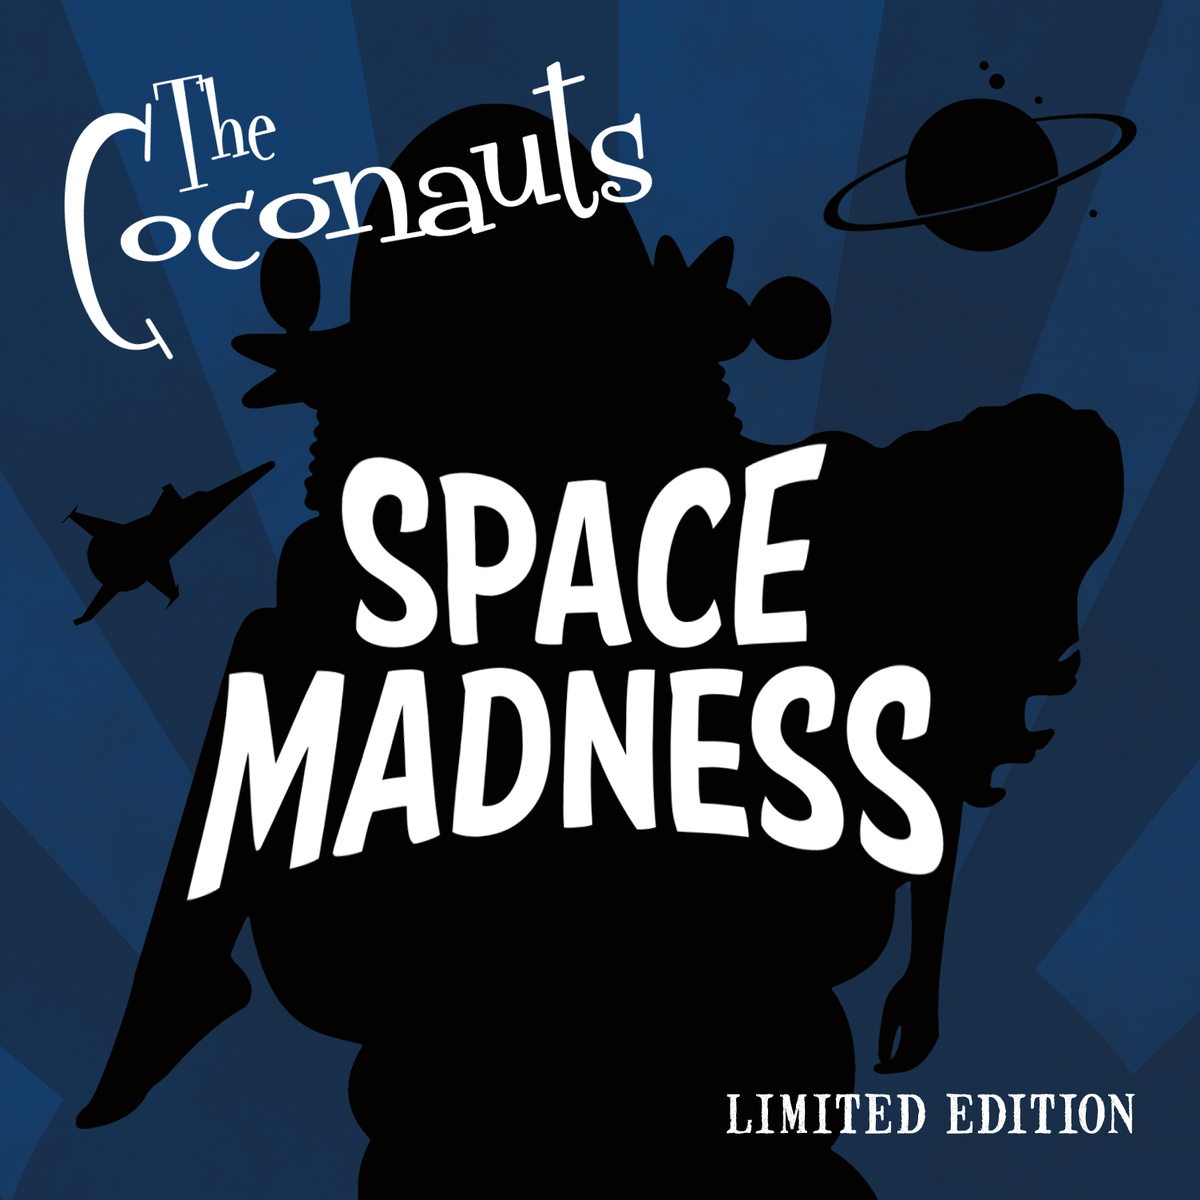 The Coconauts - Space Madness